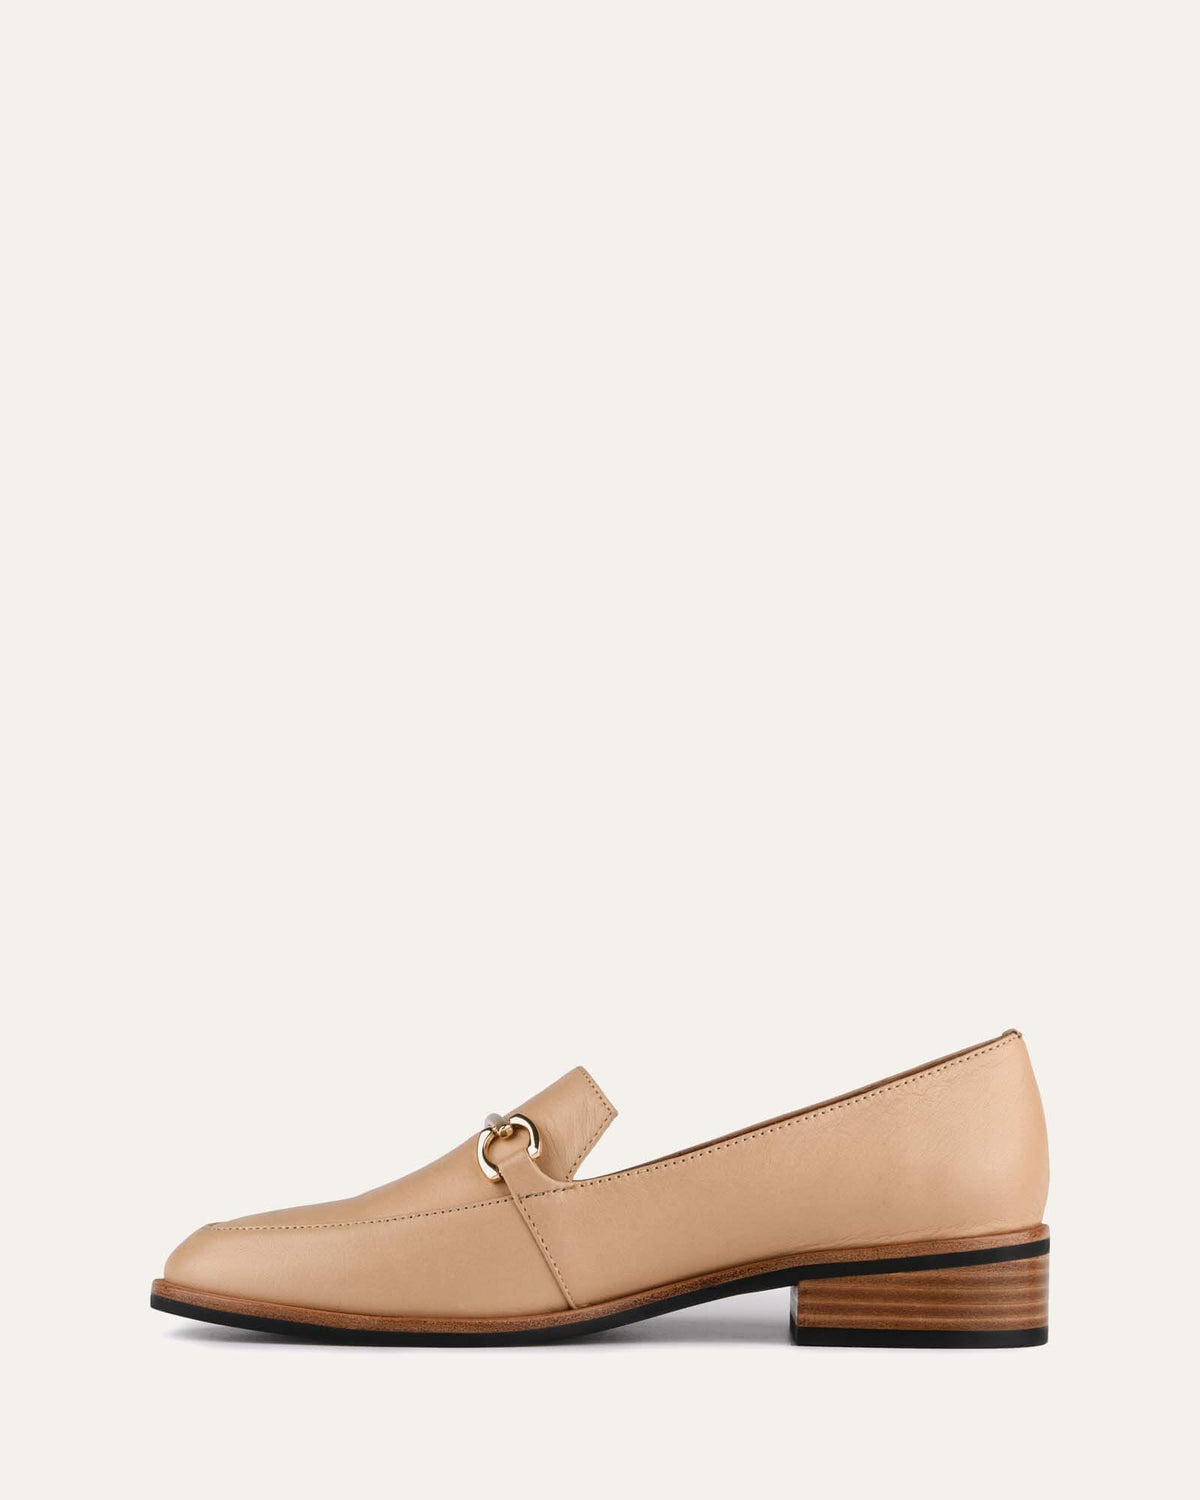 ROCKWELL LOAFERS CARAMEL LEATHER